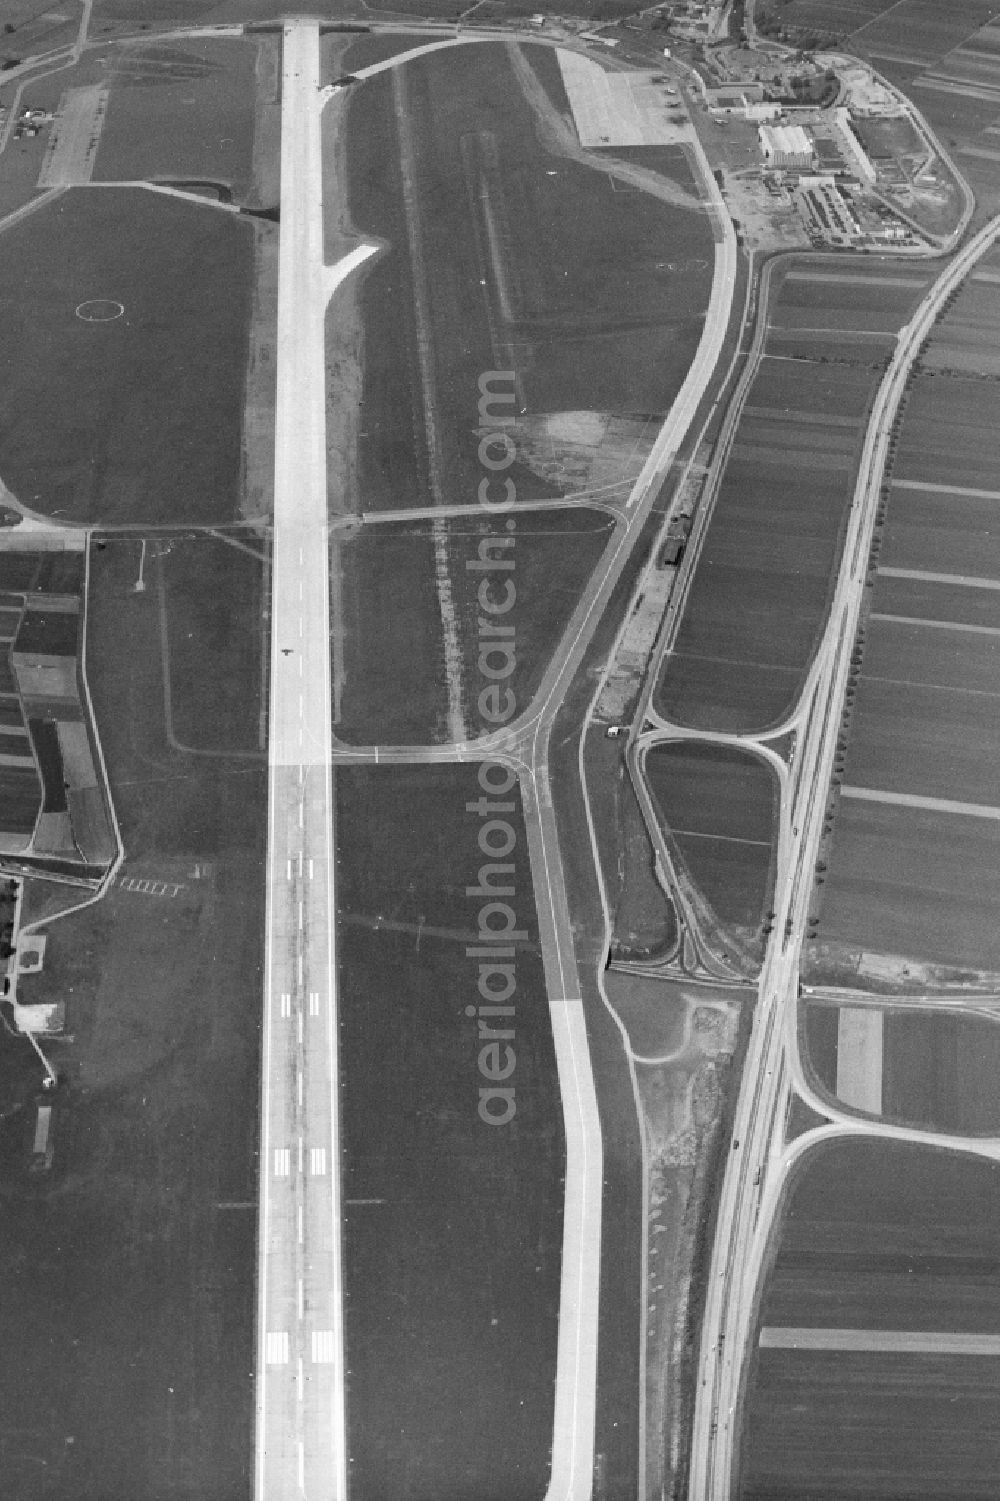 Filderstadt from the bird's eye view: Runway with hangar taxiways and terminals on the grounds of the airport in Stuttgart in the state Baden-Wuerttemberg, Germany